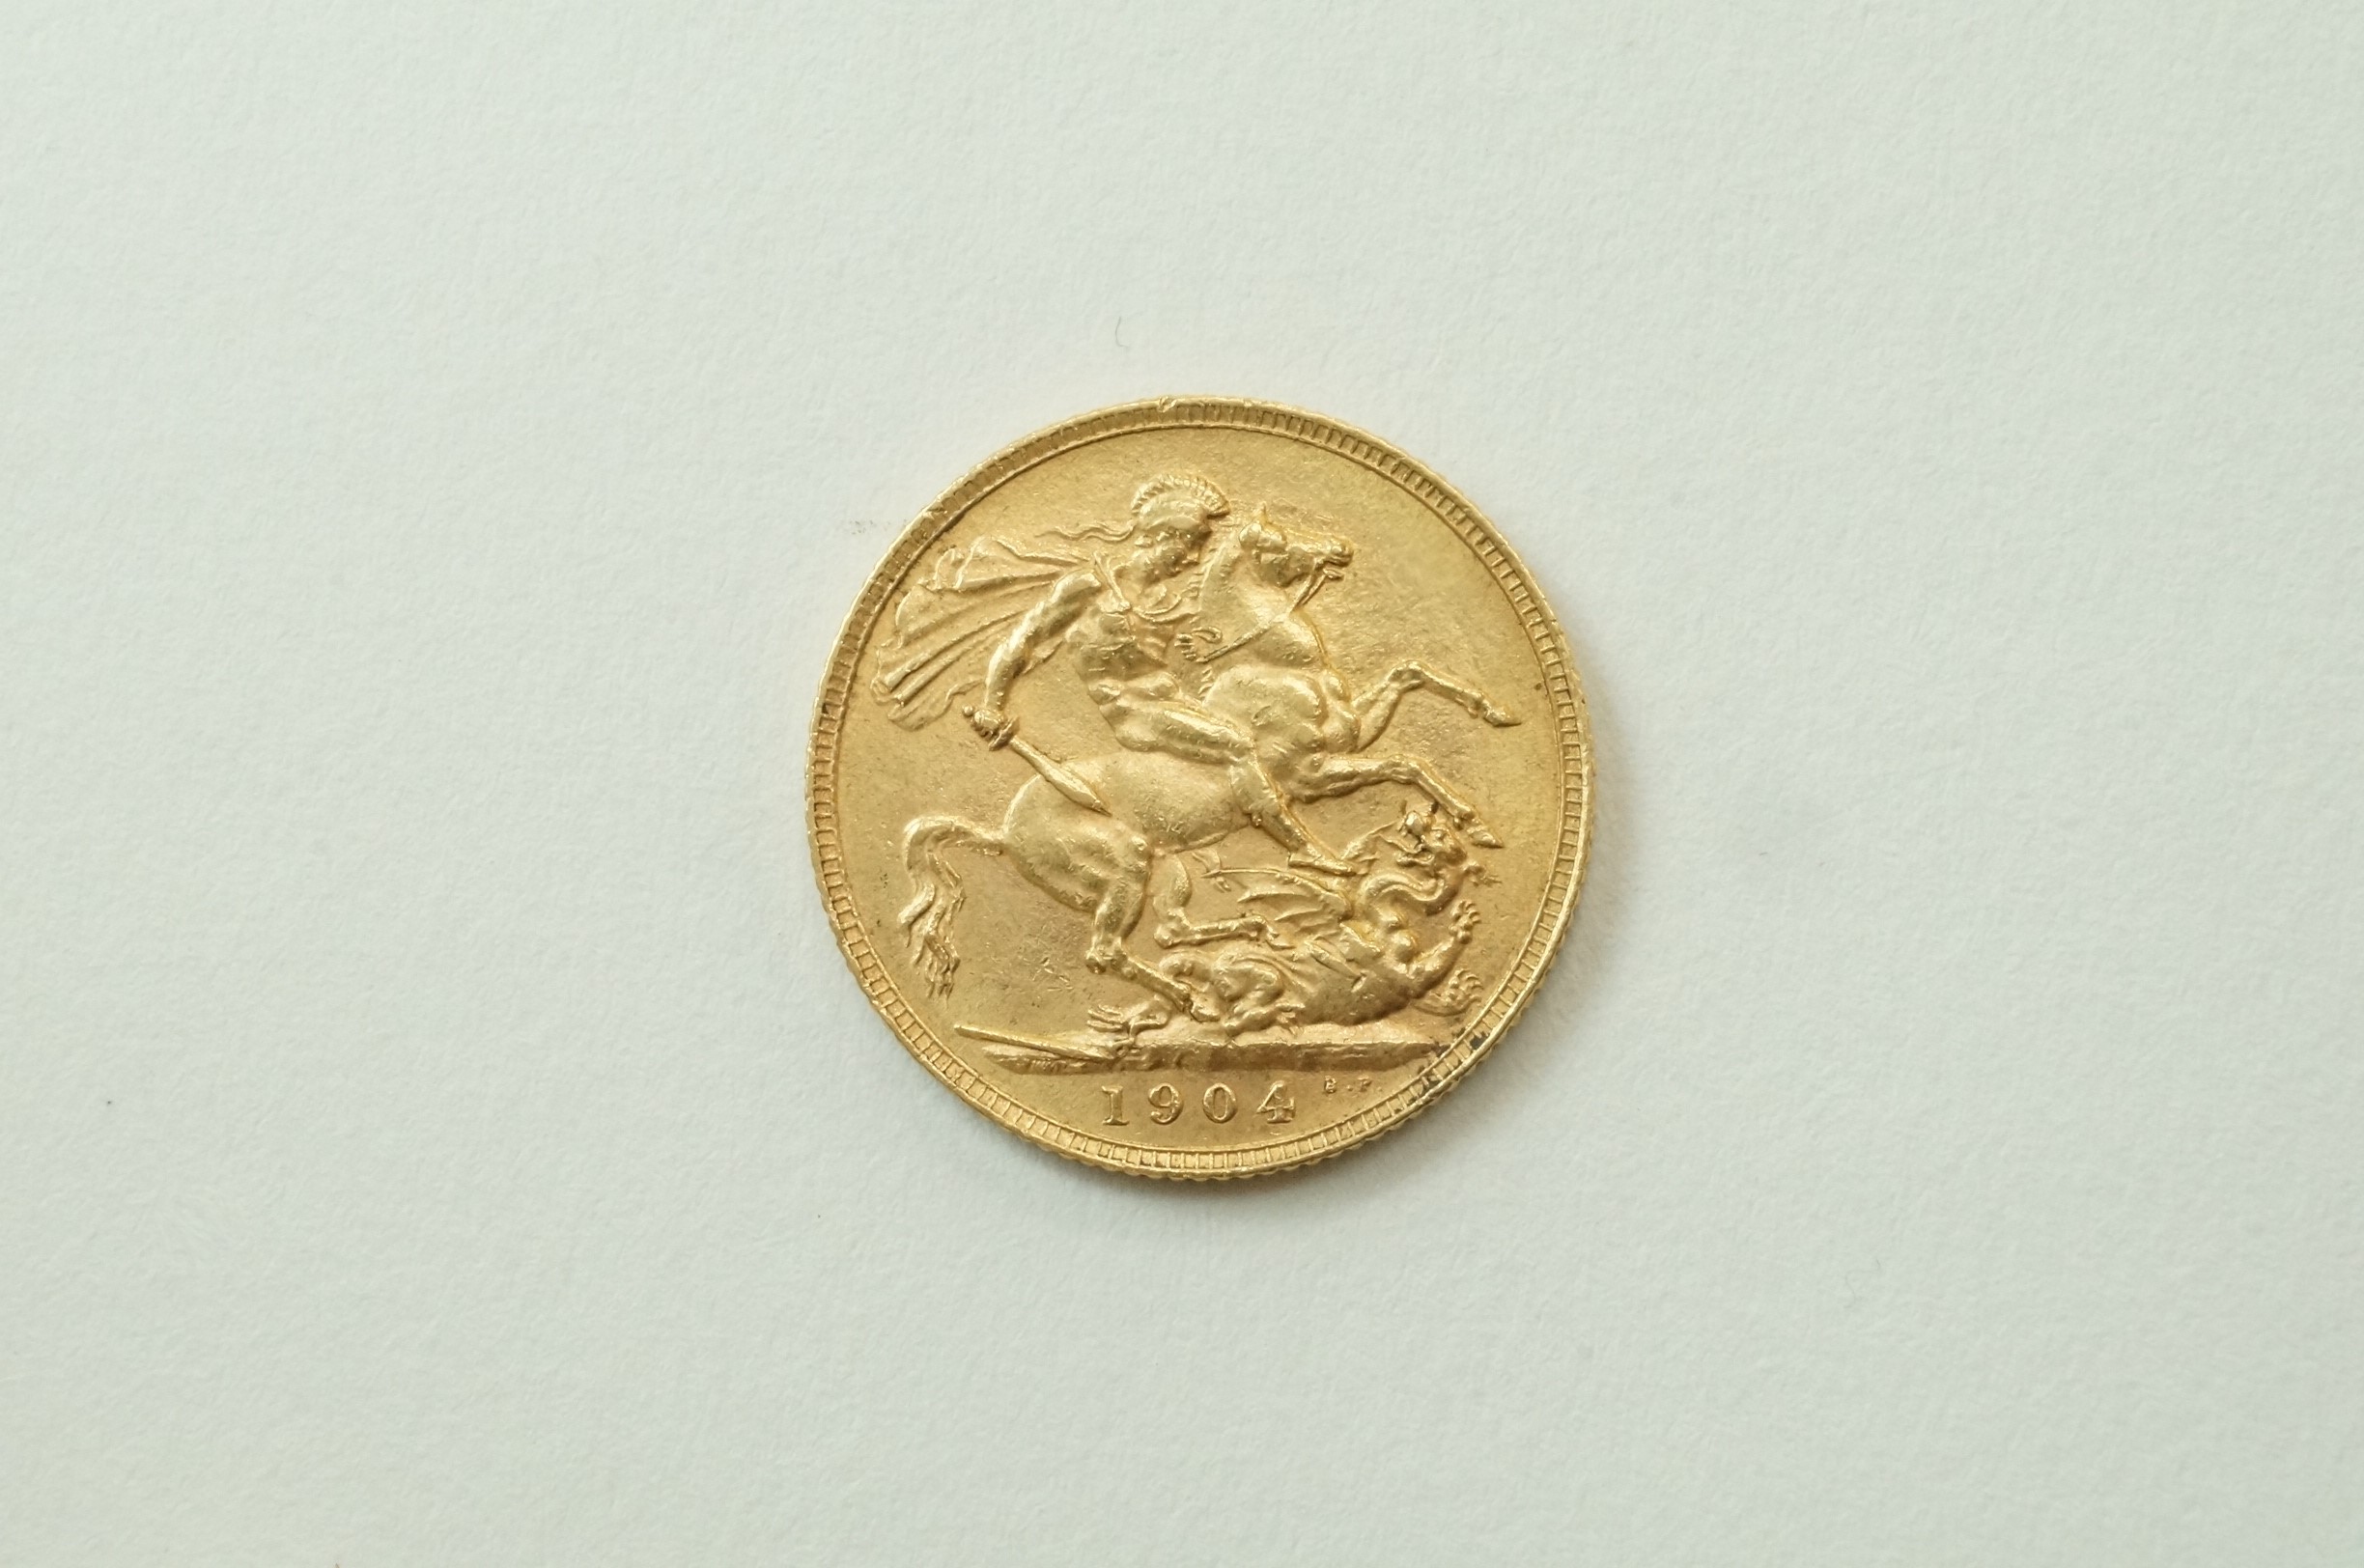 A 1904 full gold sovereign